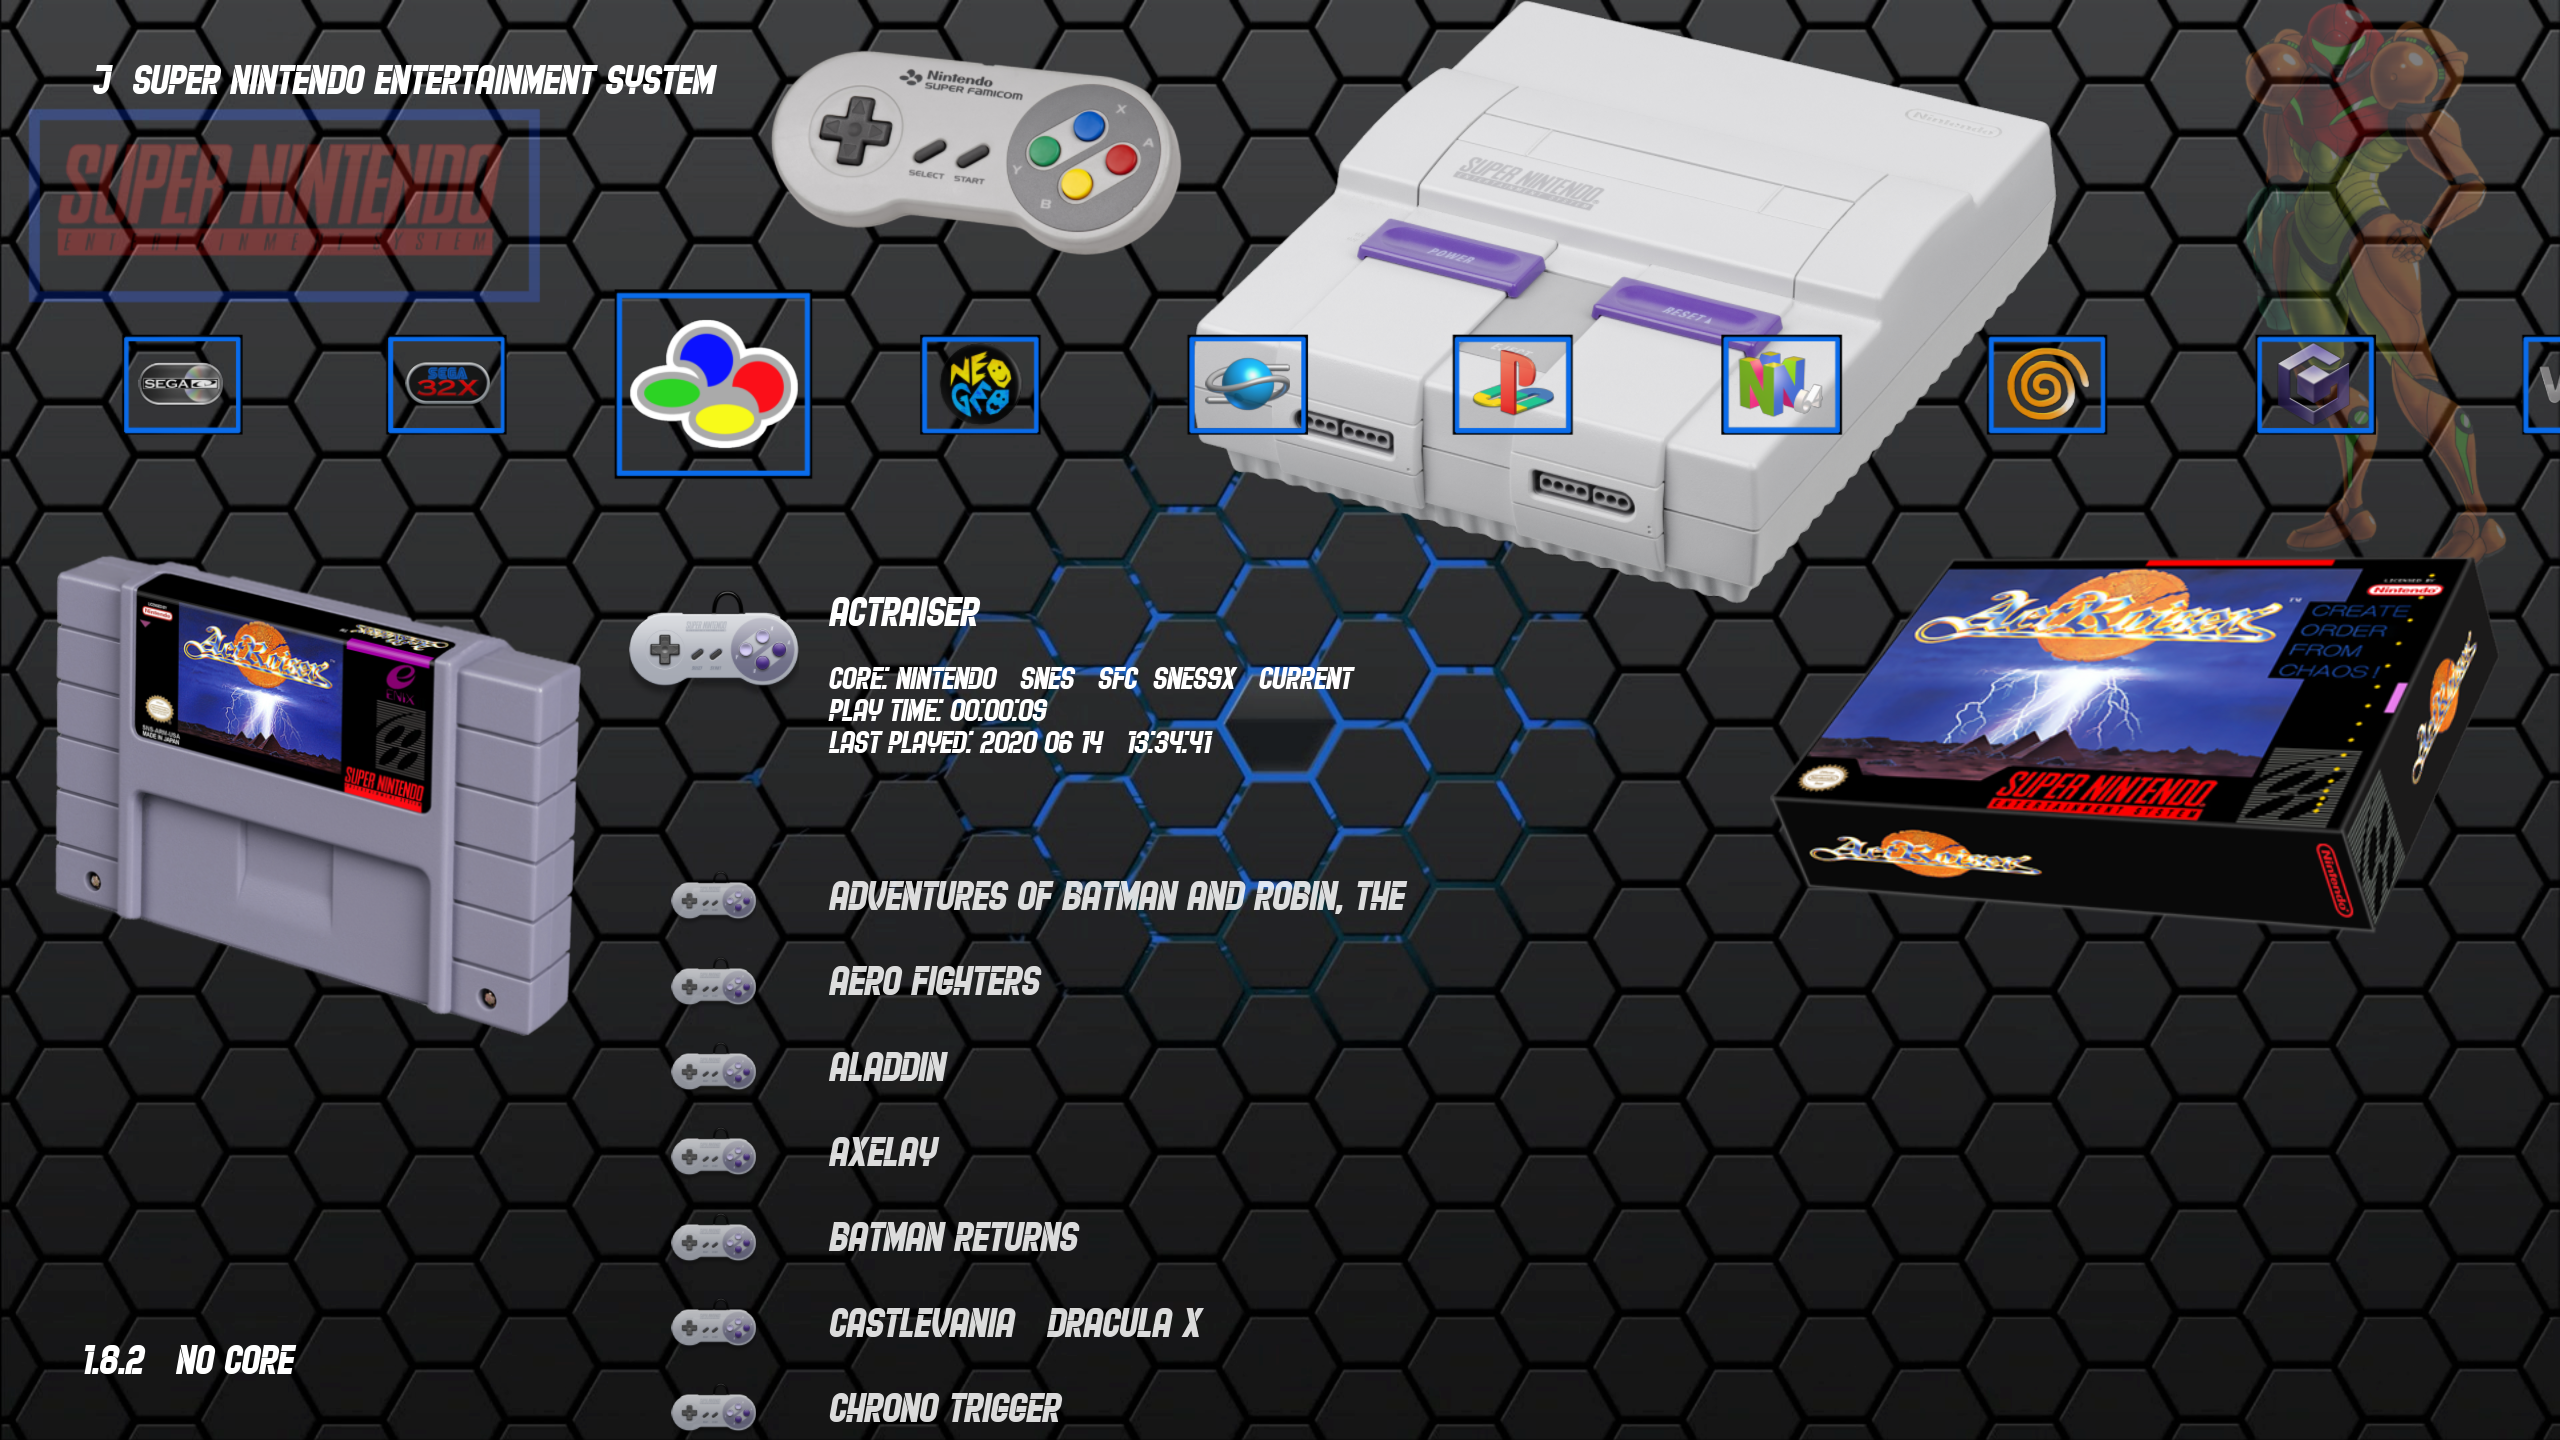 New Dynamic Wallpaper. Link provided for anyone who wants to download them. 21 consoles total.: RetroArch